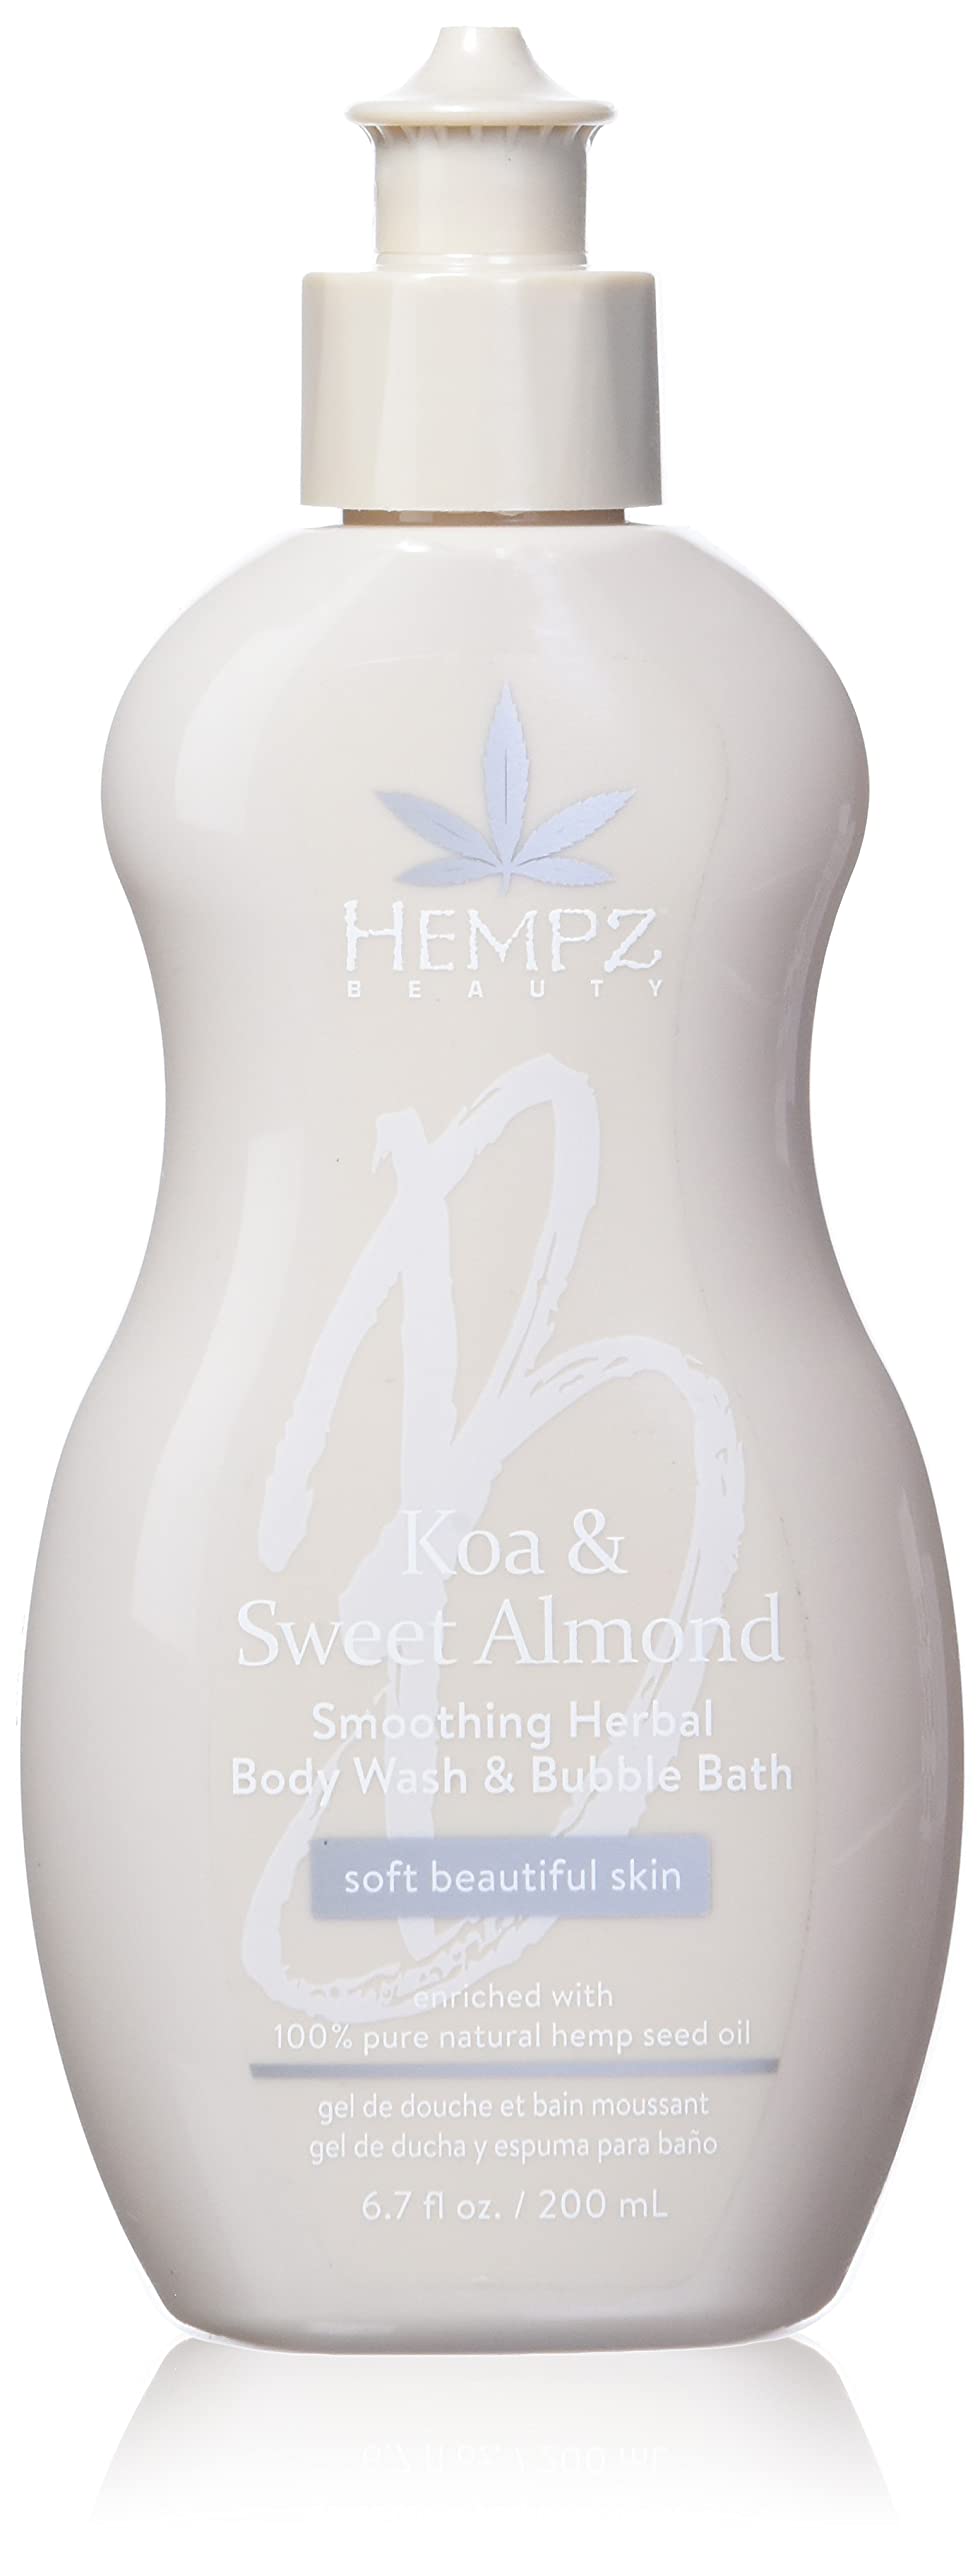 Hempz Smoothing Herbal Body Wash and Bubble Bath for Adults, Koa & Sweet Almond Scent, 6.76 oz - 2-in-1 Moisturizing Bath Soak with 100% Pure Hemp Seed Oil - Premium Relaxing Gifts for Women and Men - BeesActive Australia